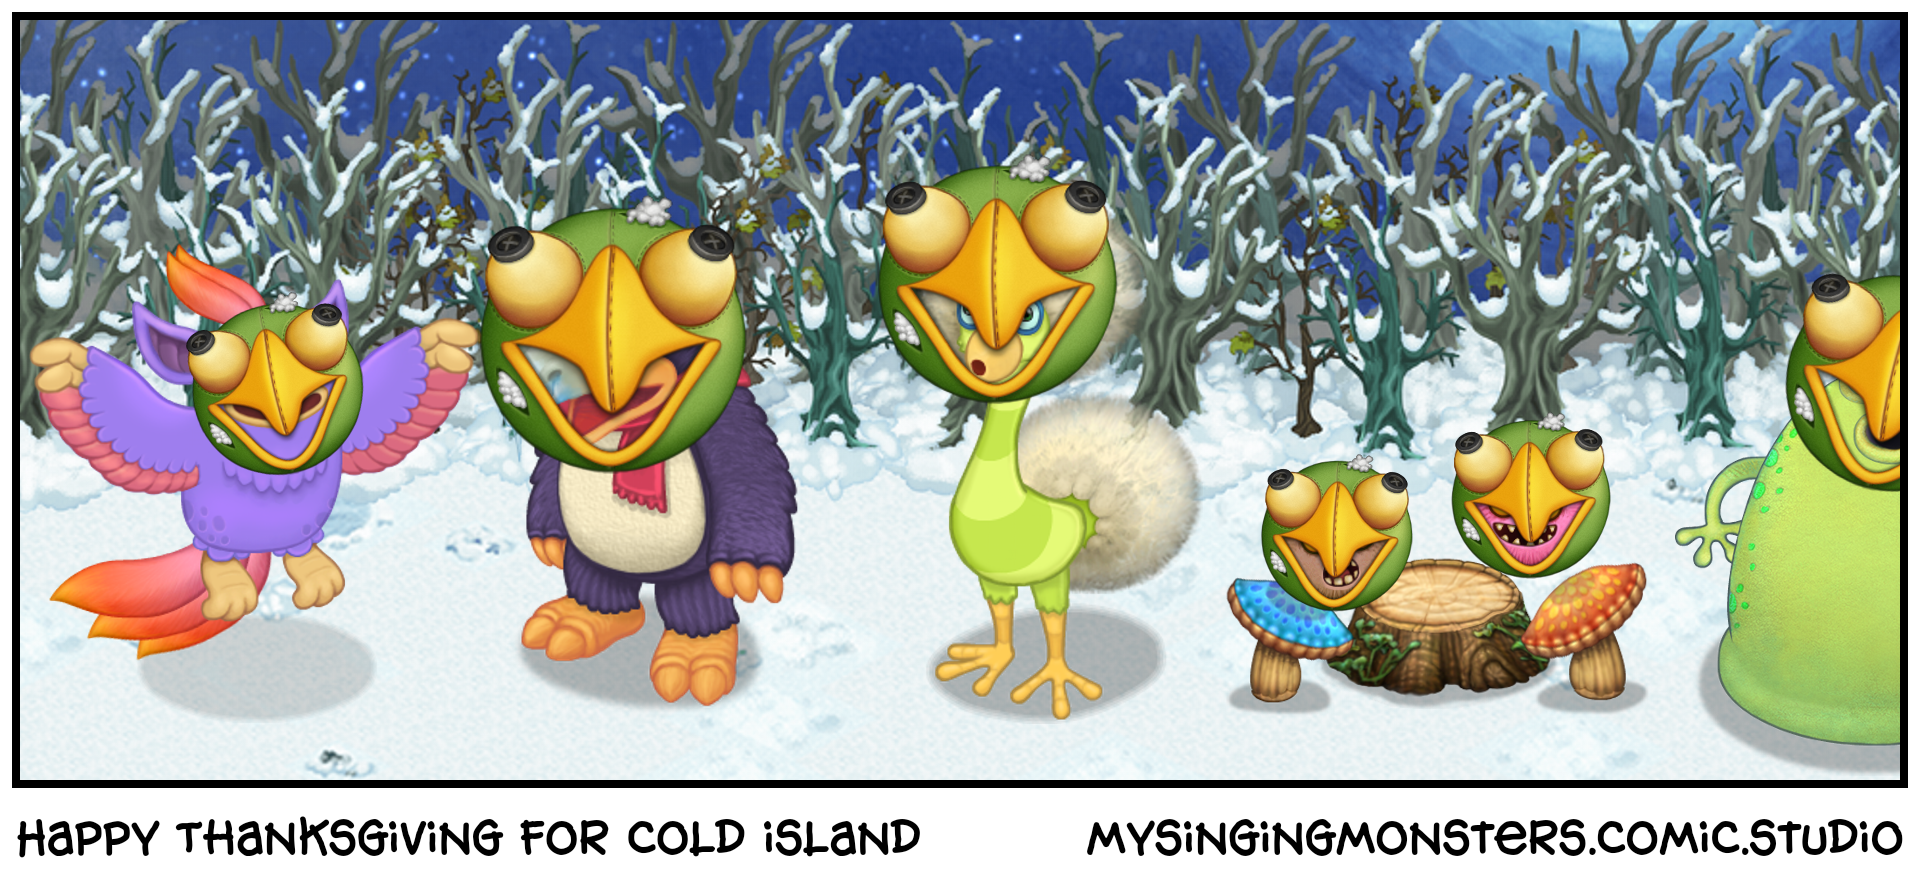 Happy Thanksgiving for cold island